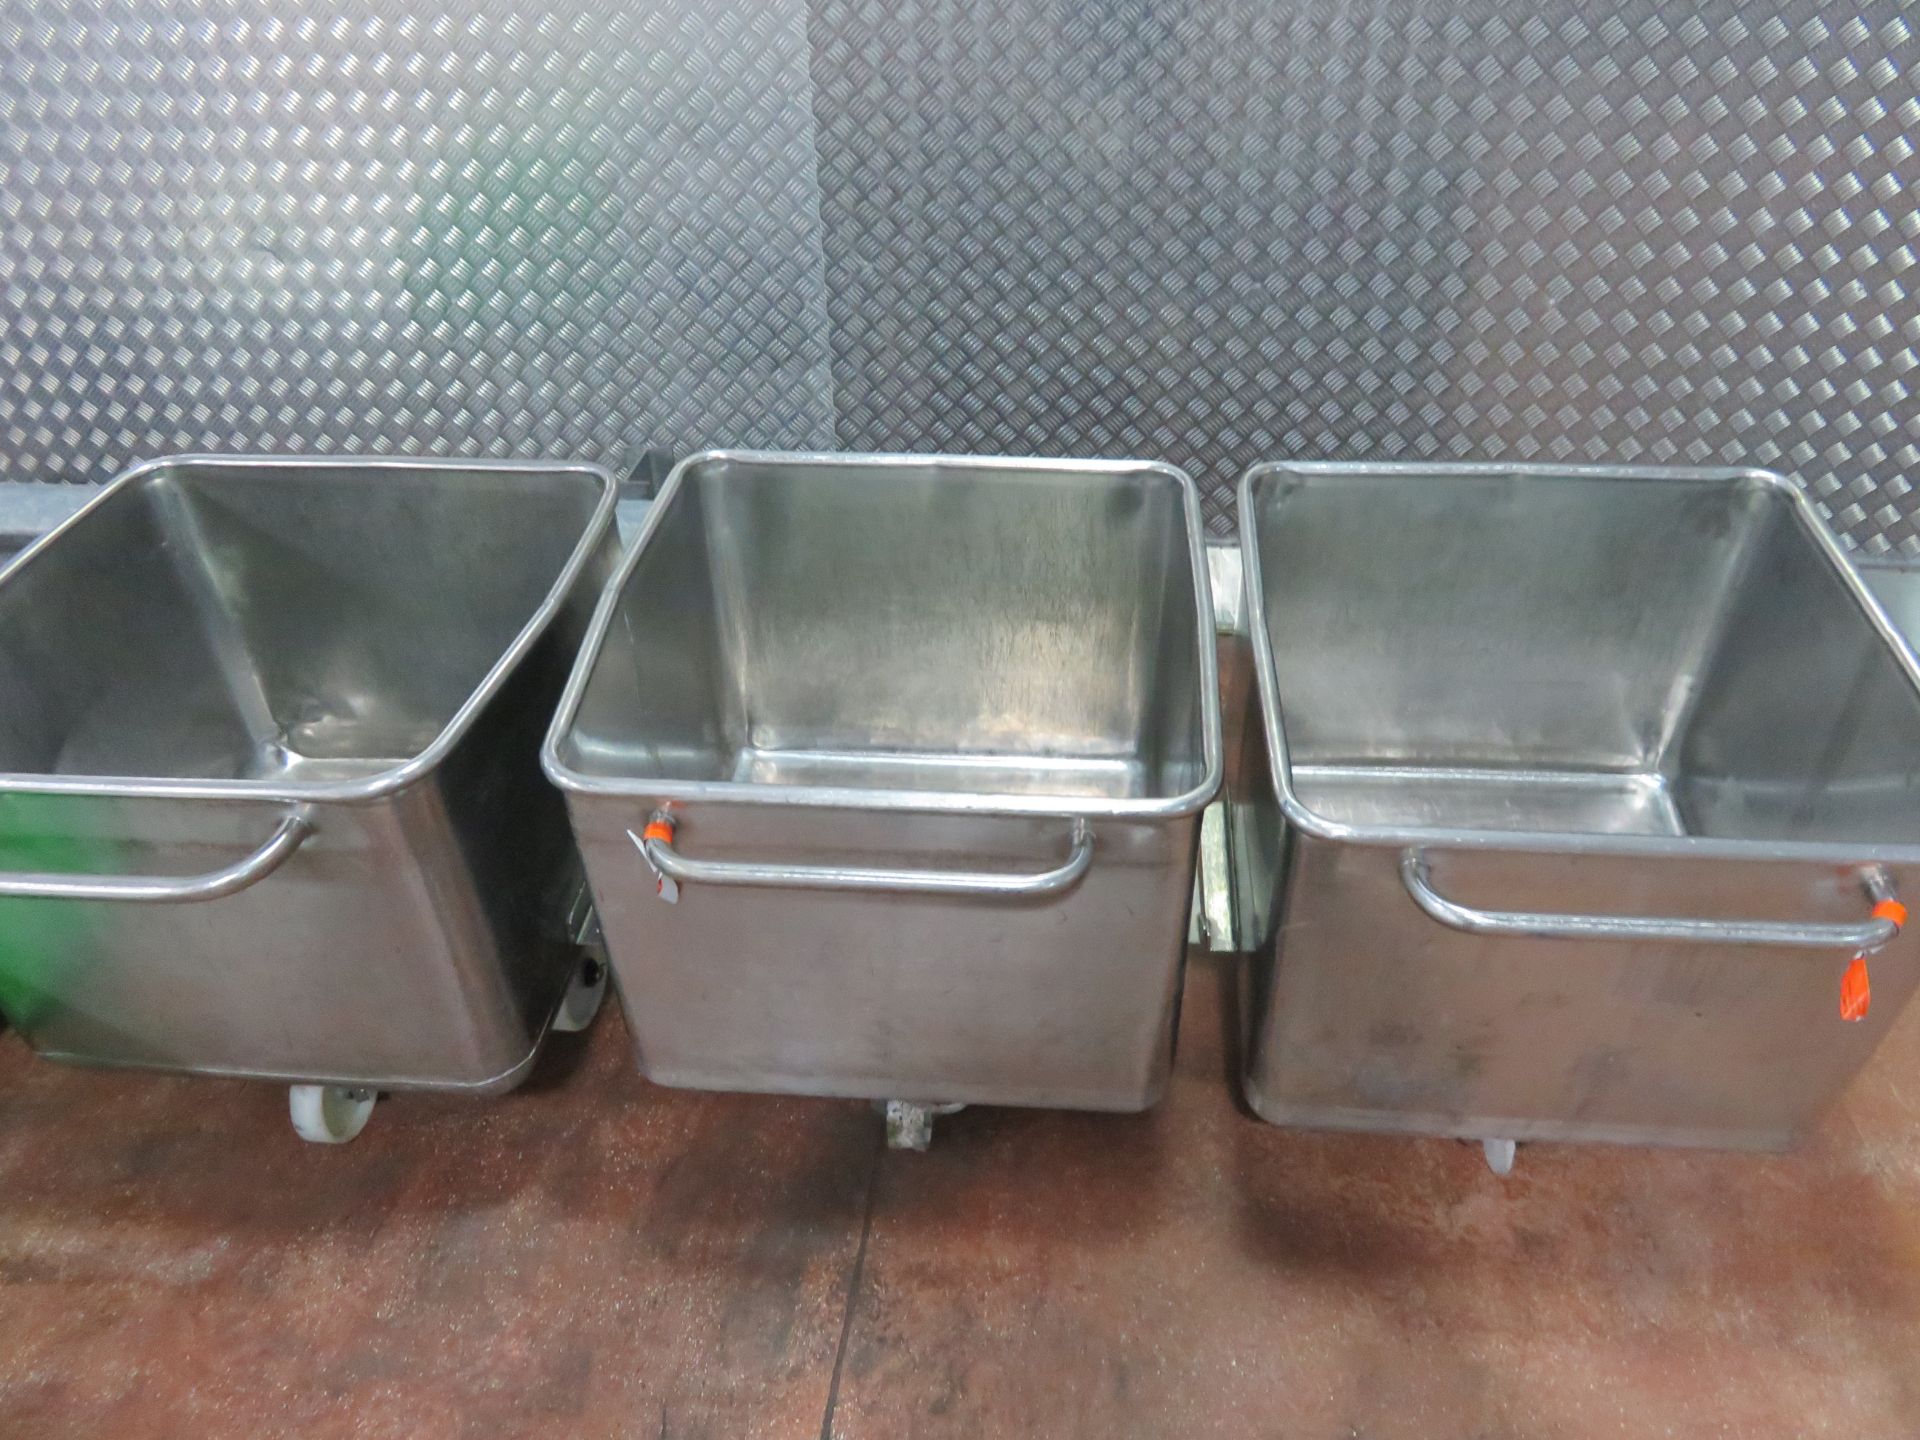 3 x 200 litre S/s Tote Bins with lip. Lift Out £10